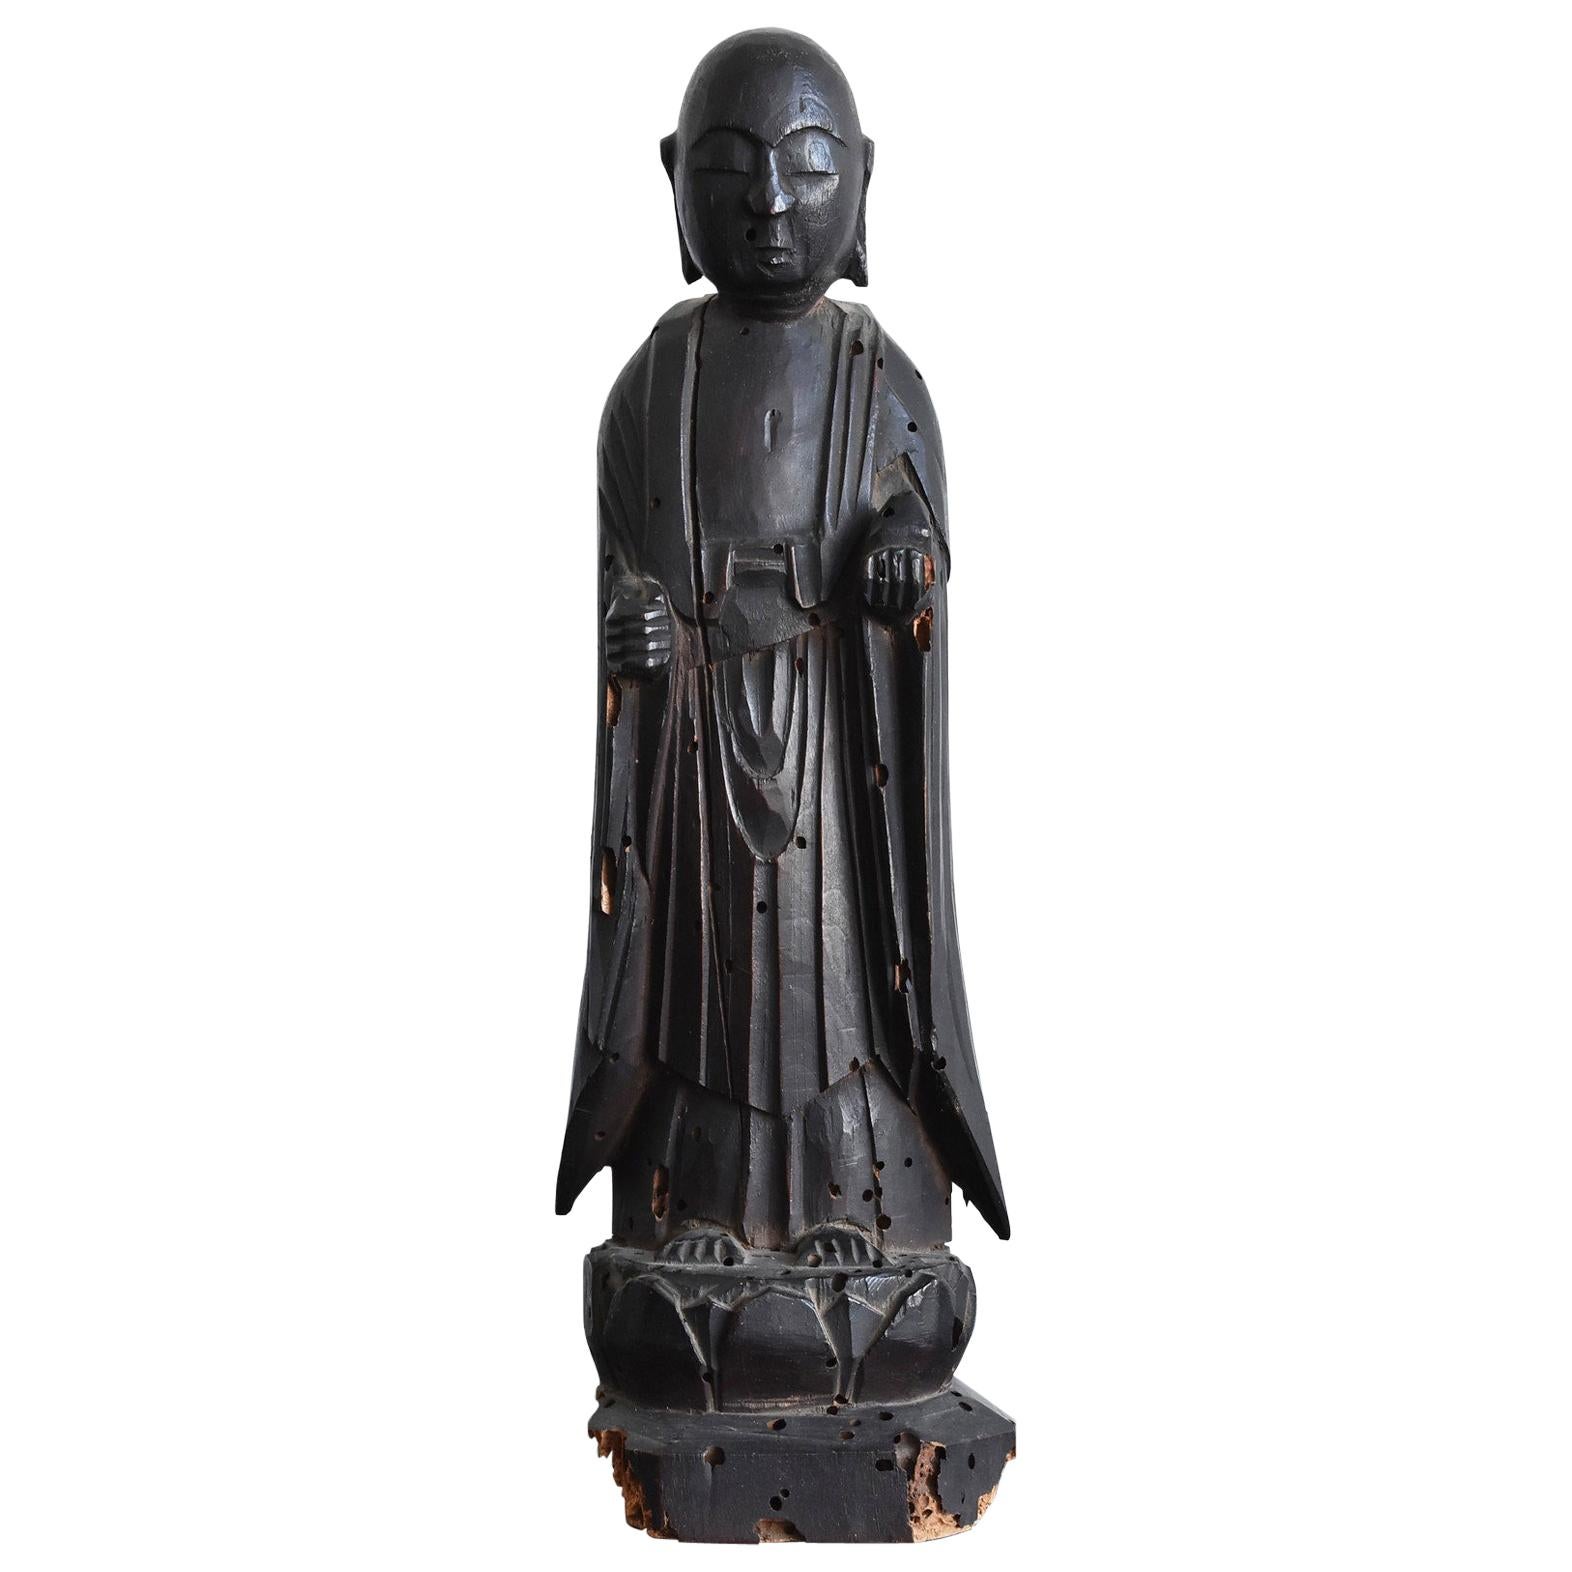 Wooden Buddha Statue from the Edo Period / Japanese Antique Figurine